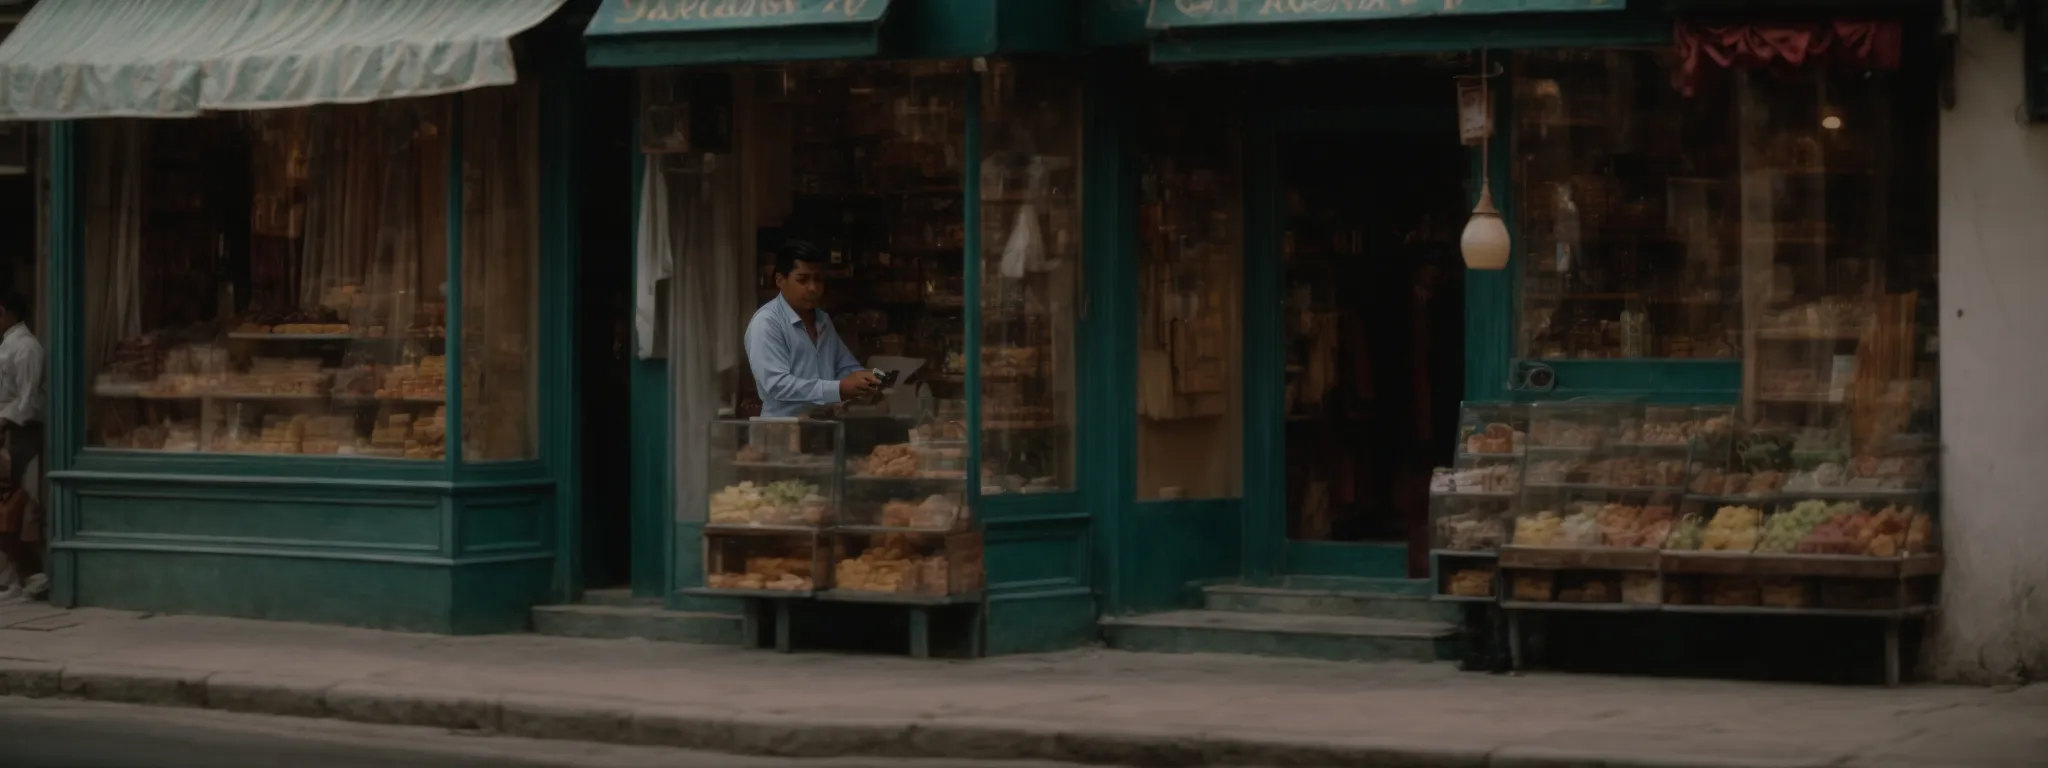 a small shopkeeper decorates a storefront on a bustling local street corner.